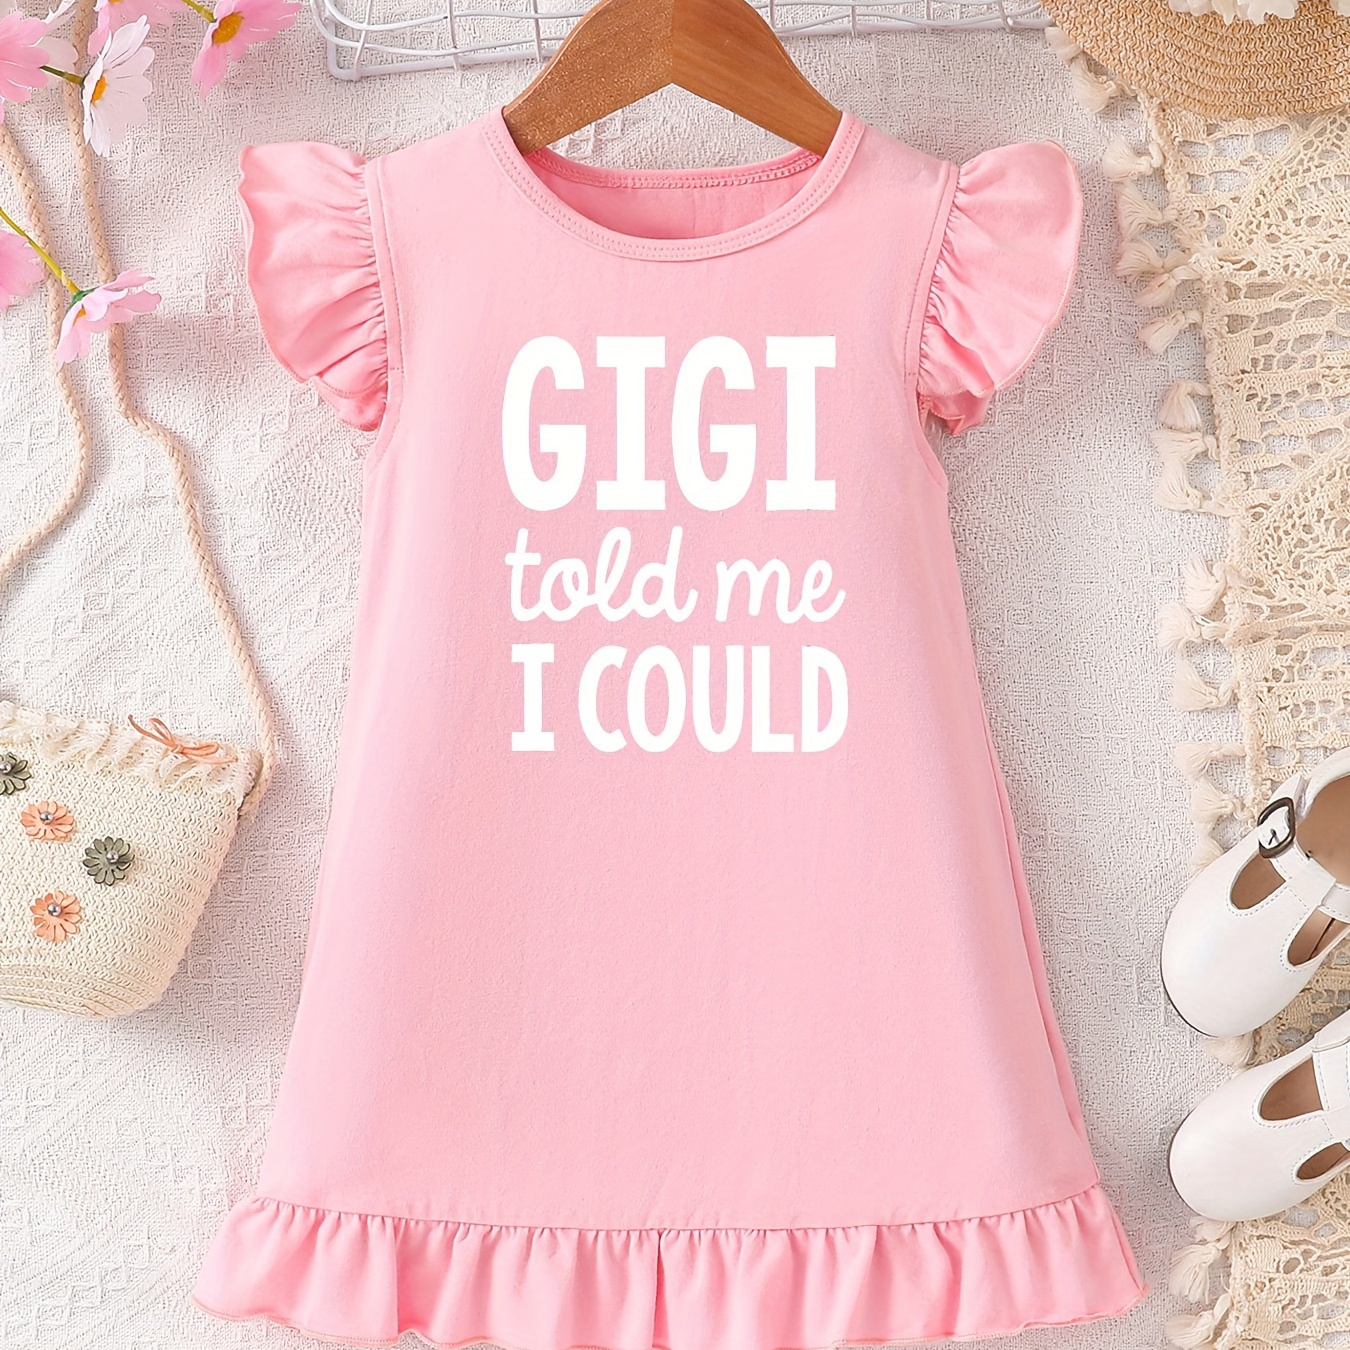 

Gigi Told Me I Could Print, Baby Girls' Comfy Crew Neck Ruffle Trim Cotton Dress For Spring & Summer, Toddler Girls' Clothes For Daily Activities